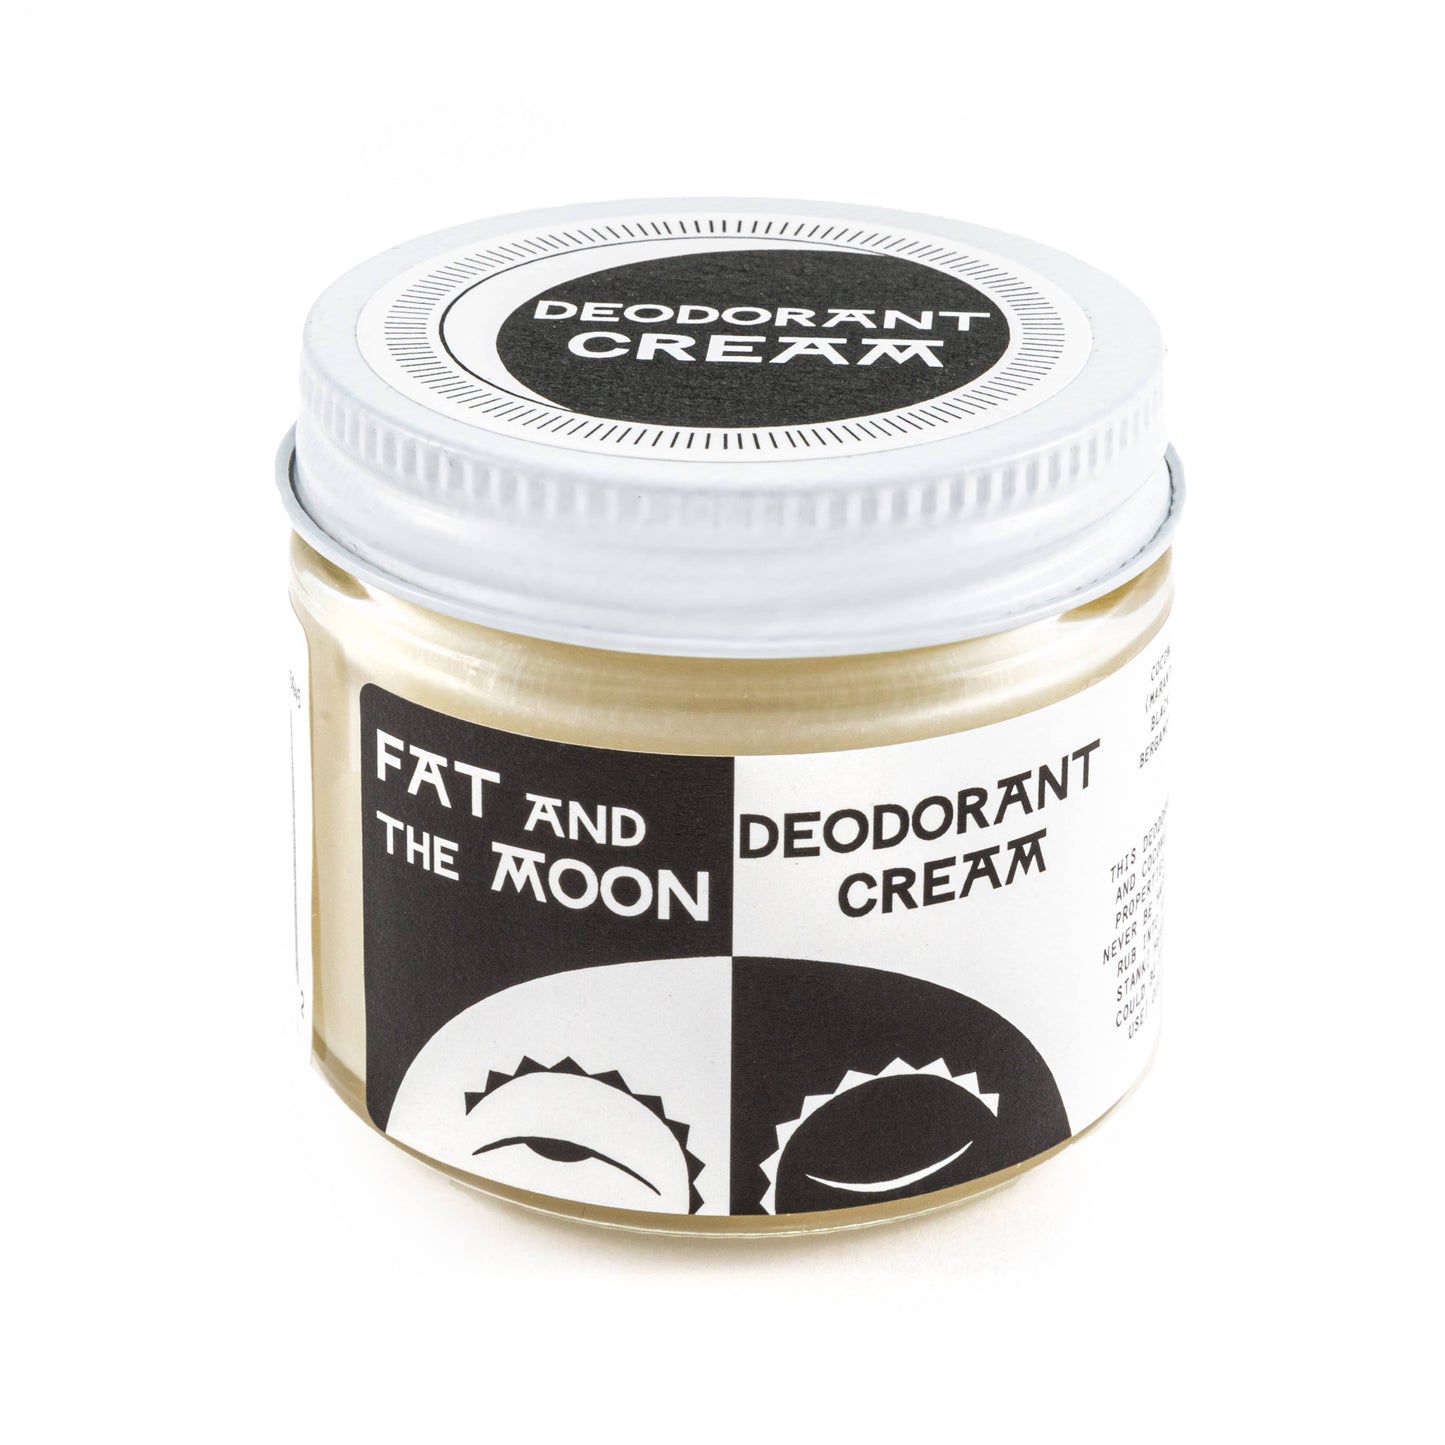 ONLINE ONLY - 
Fat & the Moon
Deodorant Cream